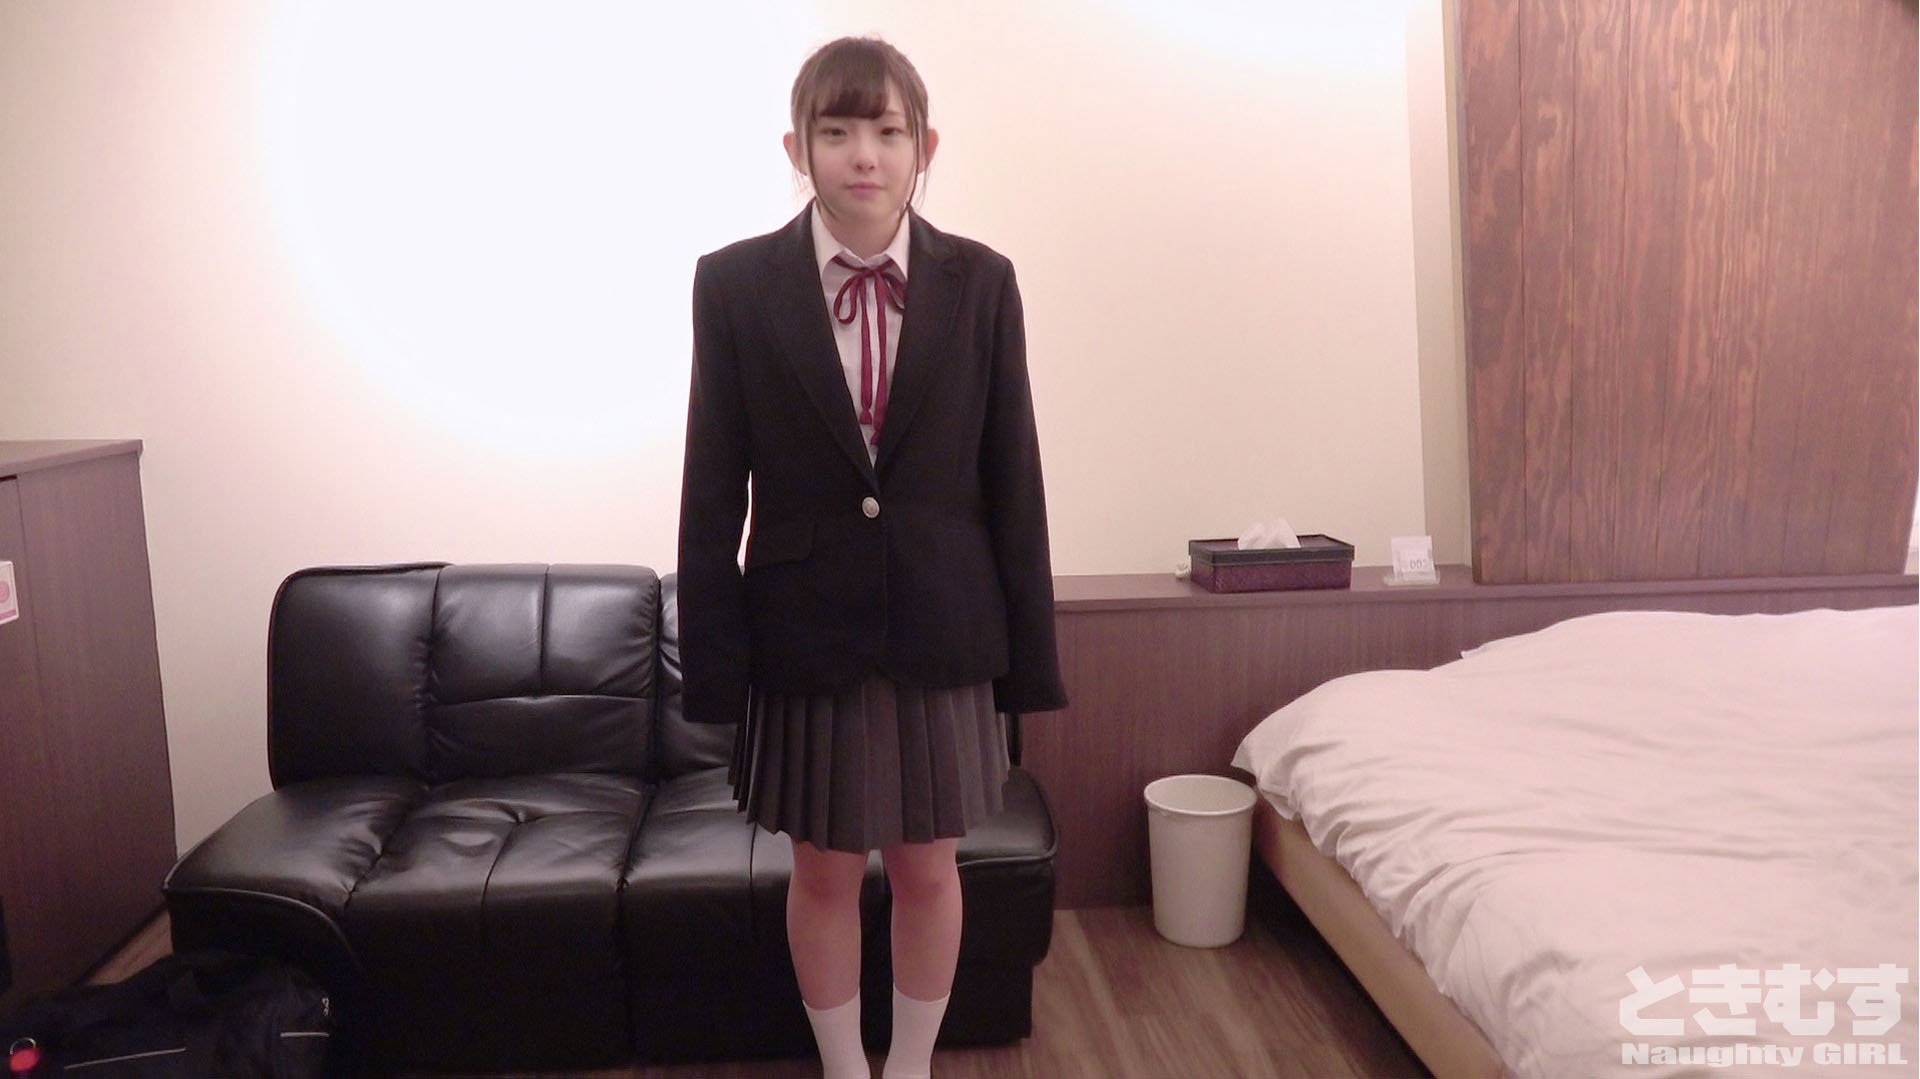 Uniform Sequel Kabukicho Minimum system with cute pigtails I reunited with that developing child and enjoyed SEX while wearing uniforms